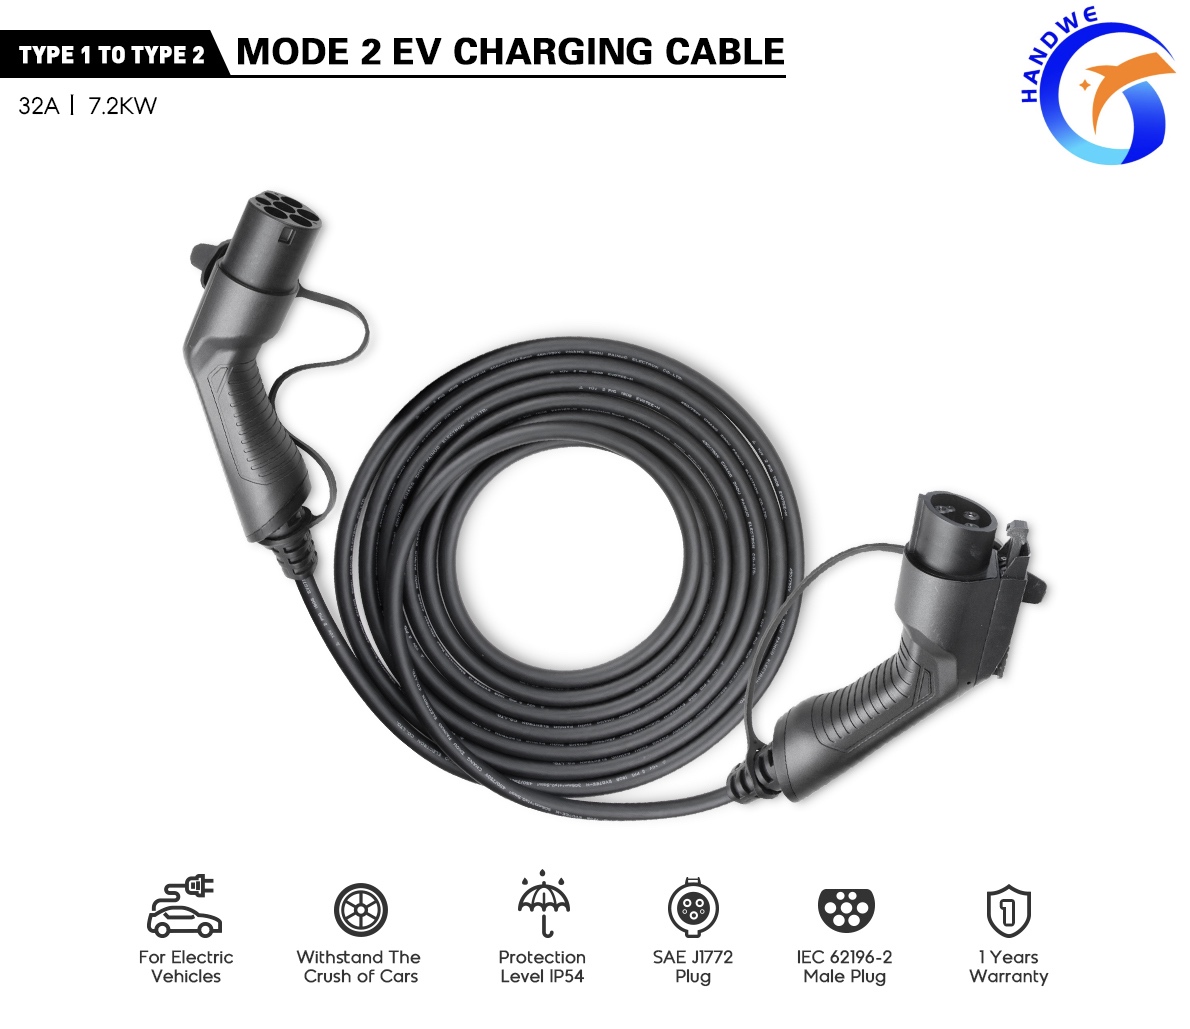 32A 7.2kW SAE J1772 to IEC 62196-2 Extension Cable.jpg